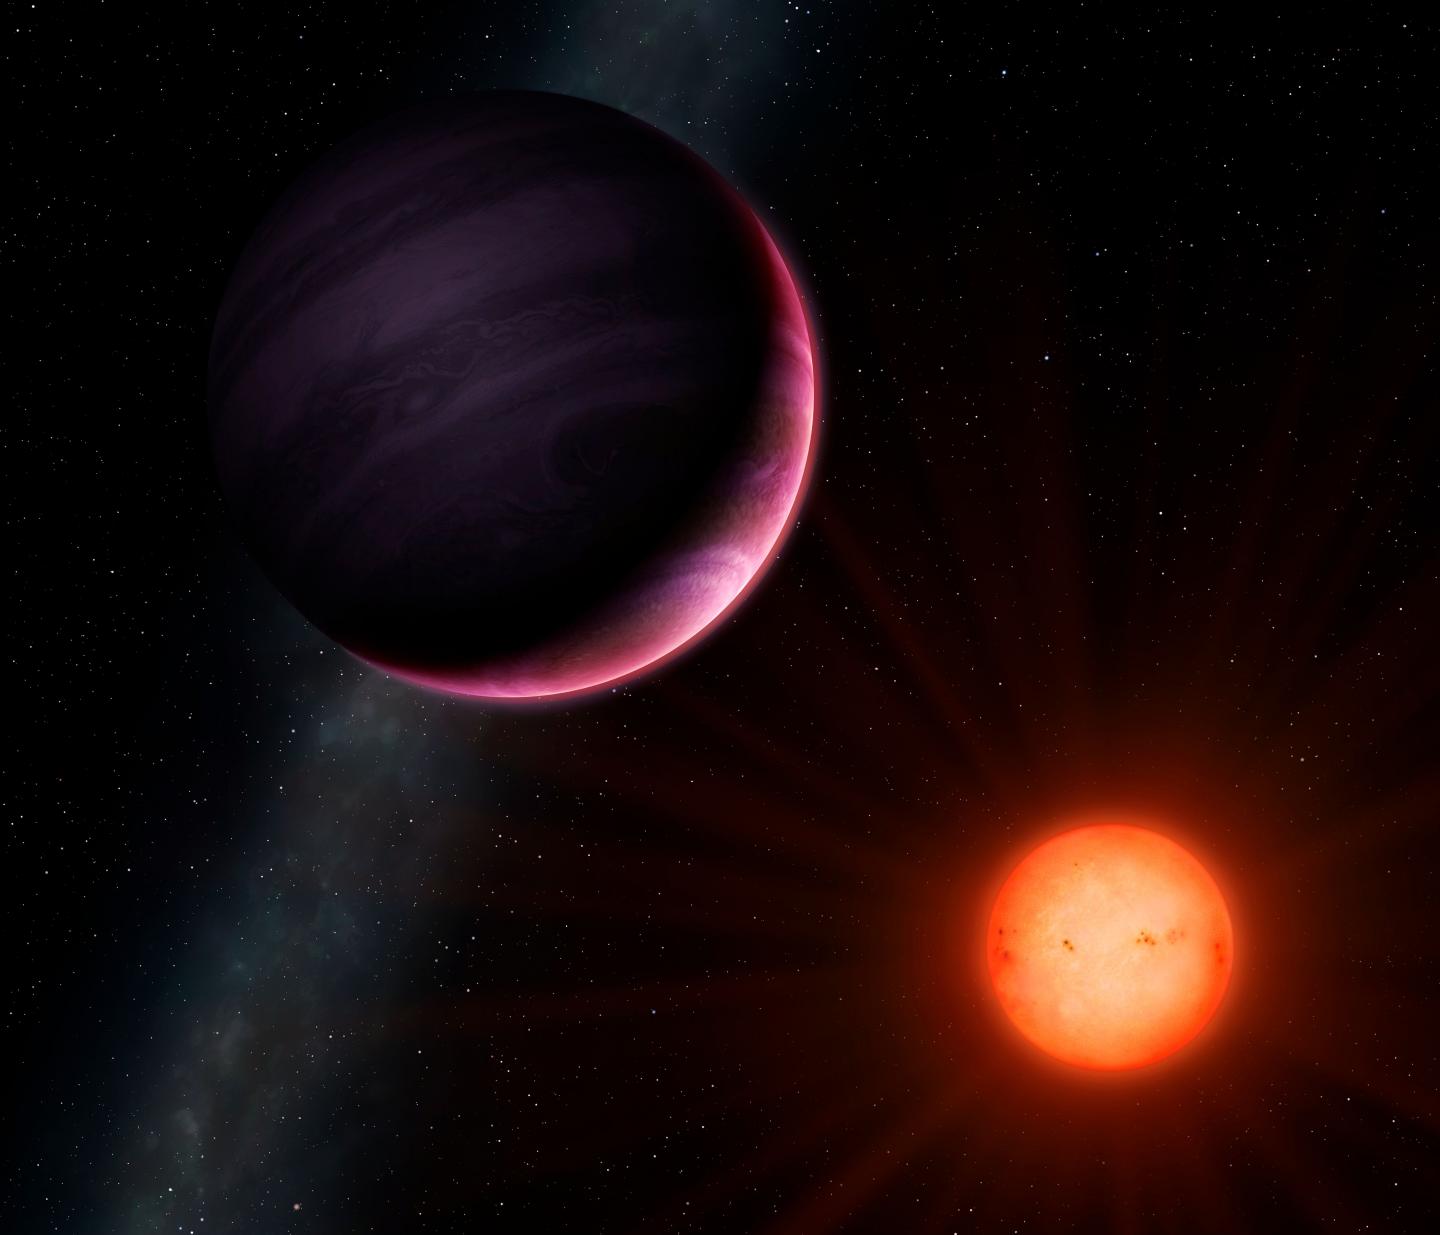 Artist's Impression of Sunrise on Planet NGTS-1b with its Neighboring Sun